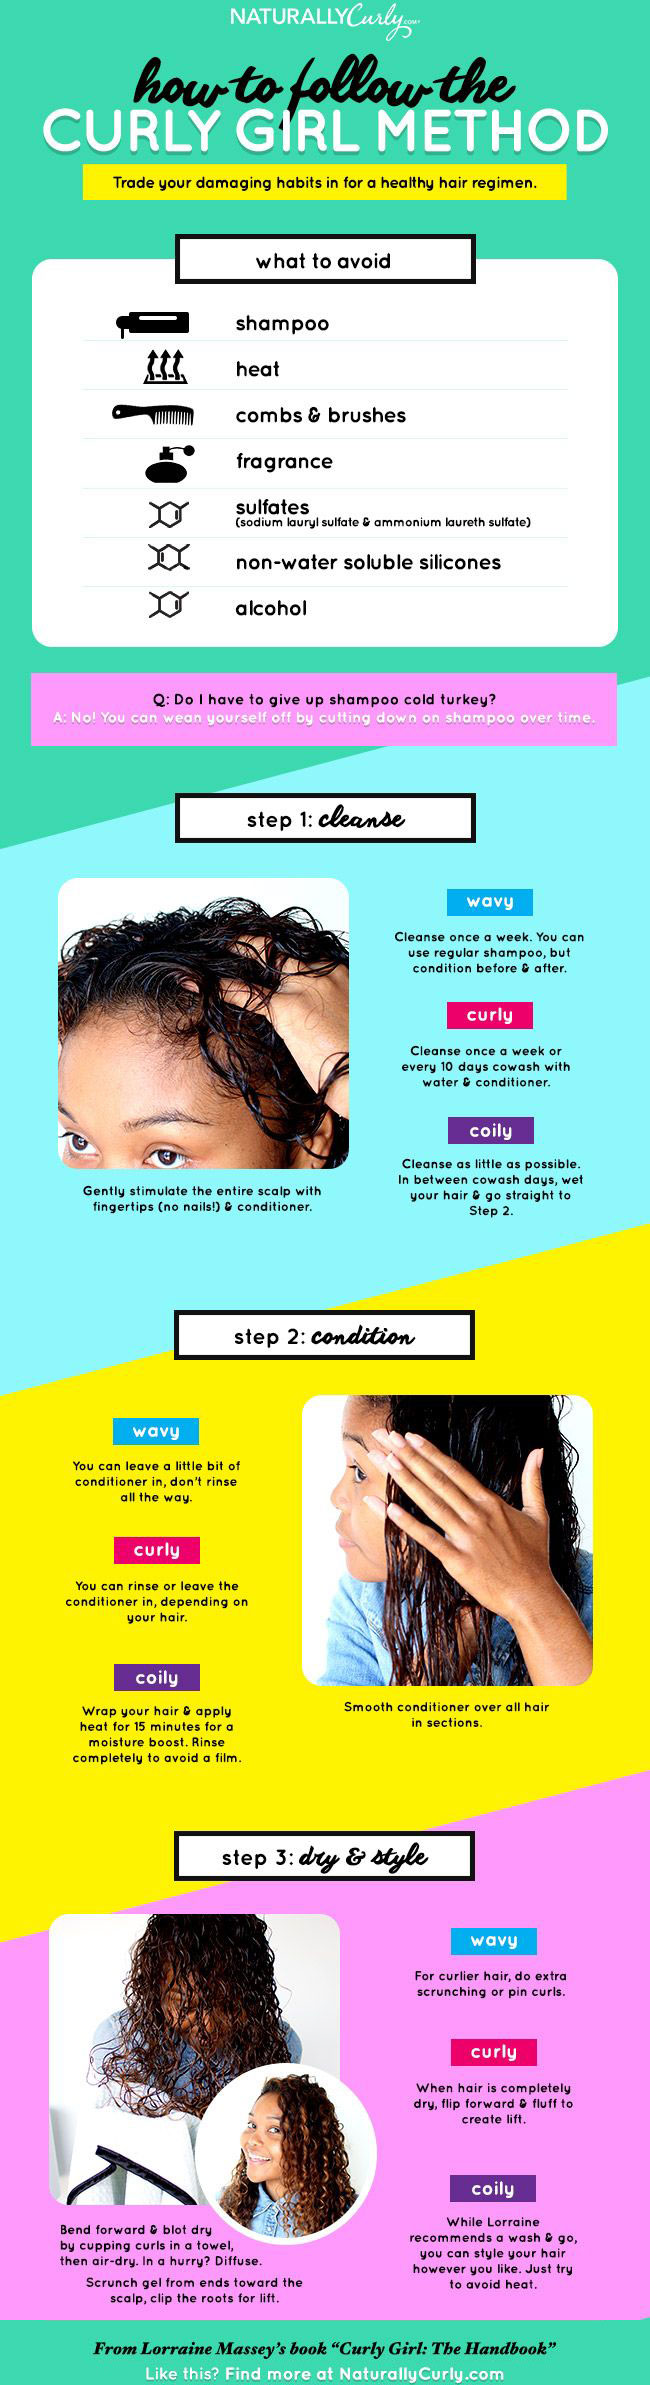 How to Follow the Curly Girl Method